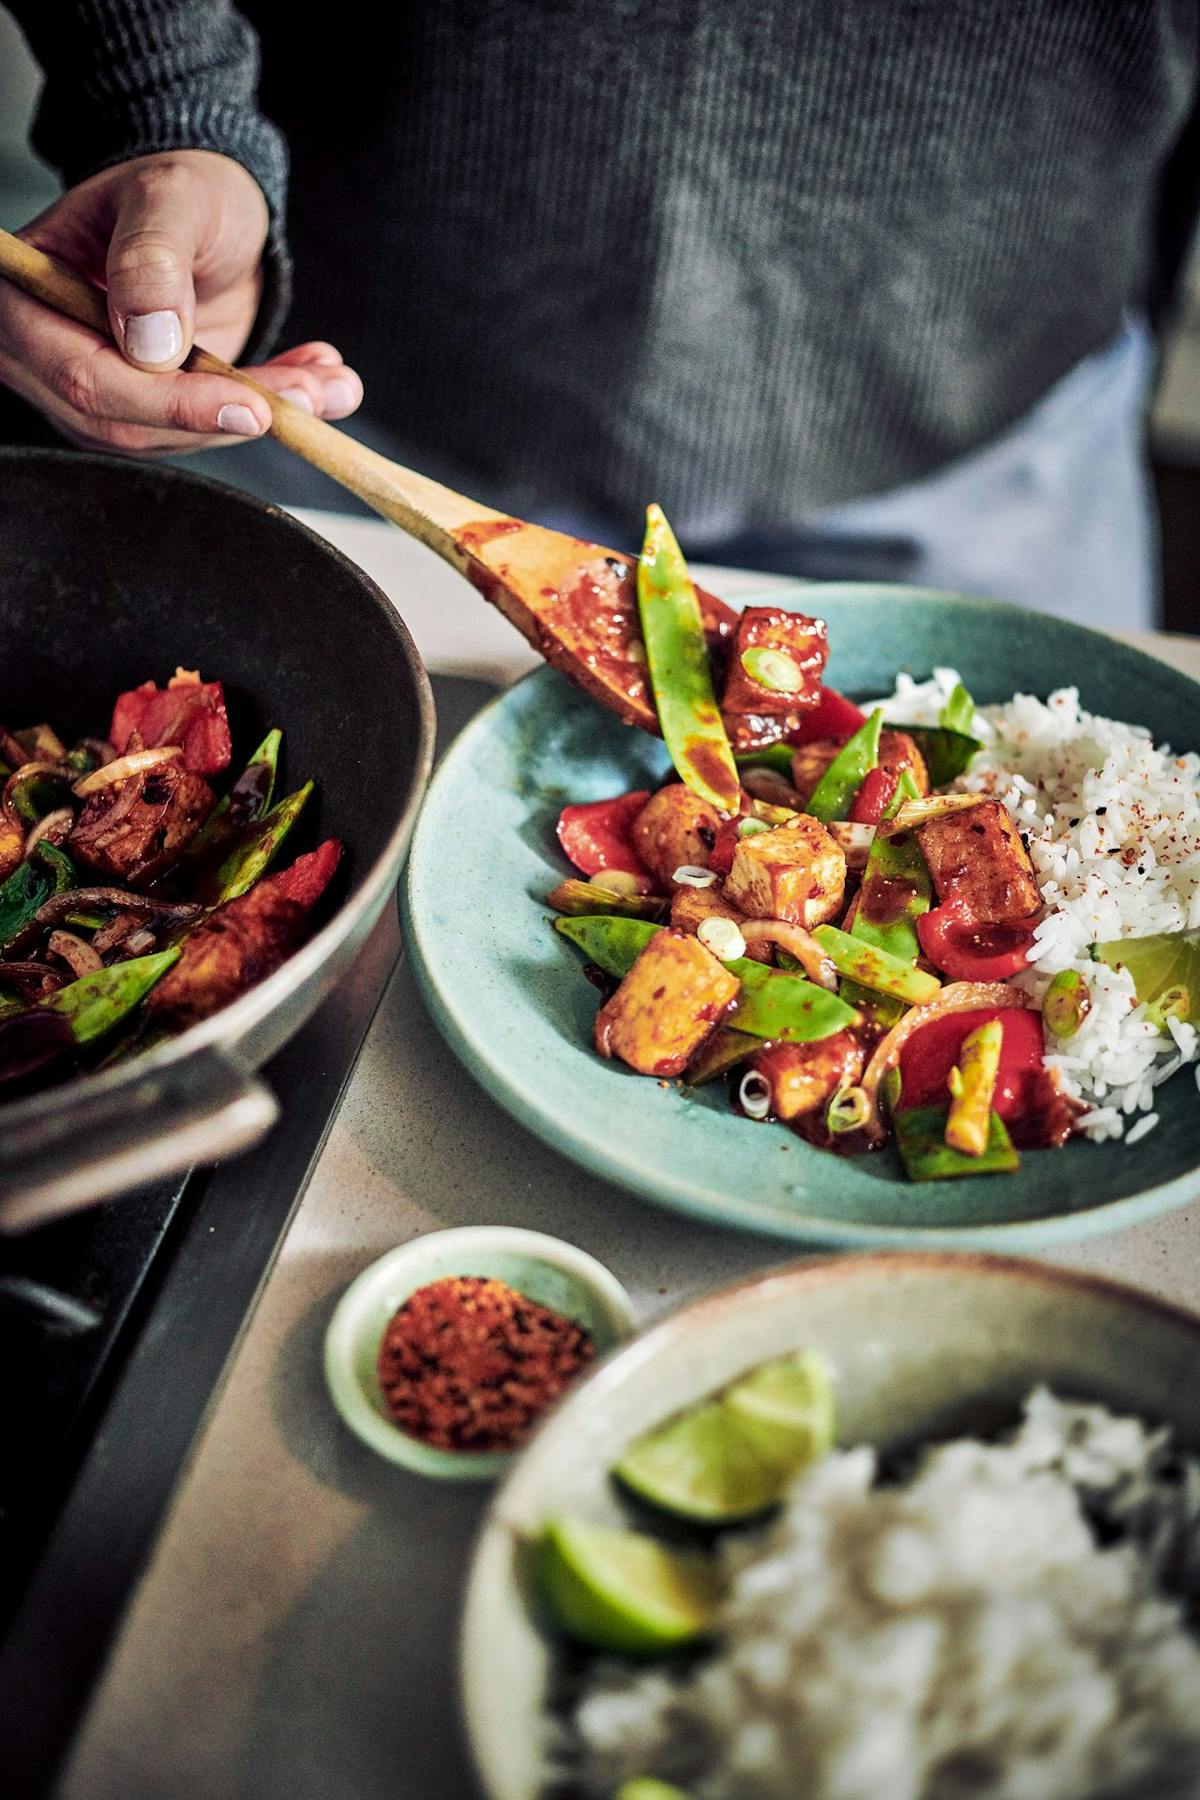 Wagamama recipes: 3 classic dishes from the restaurant's new book